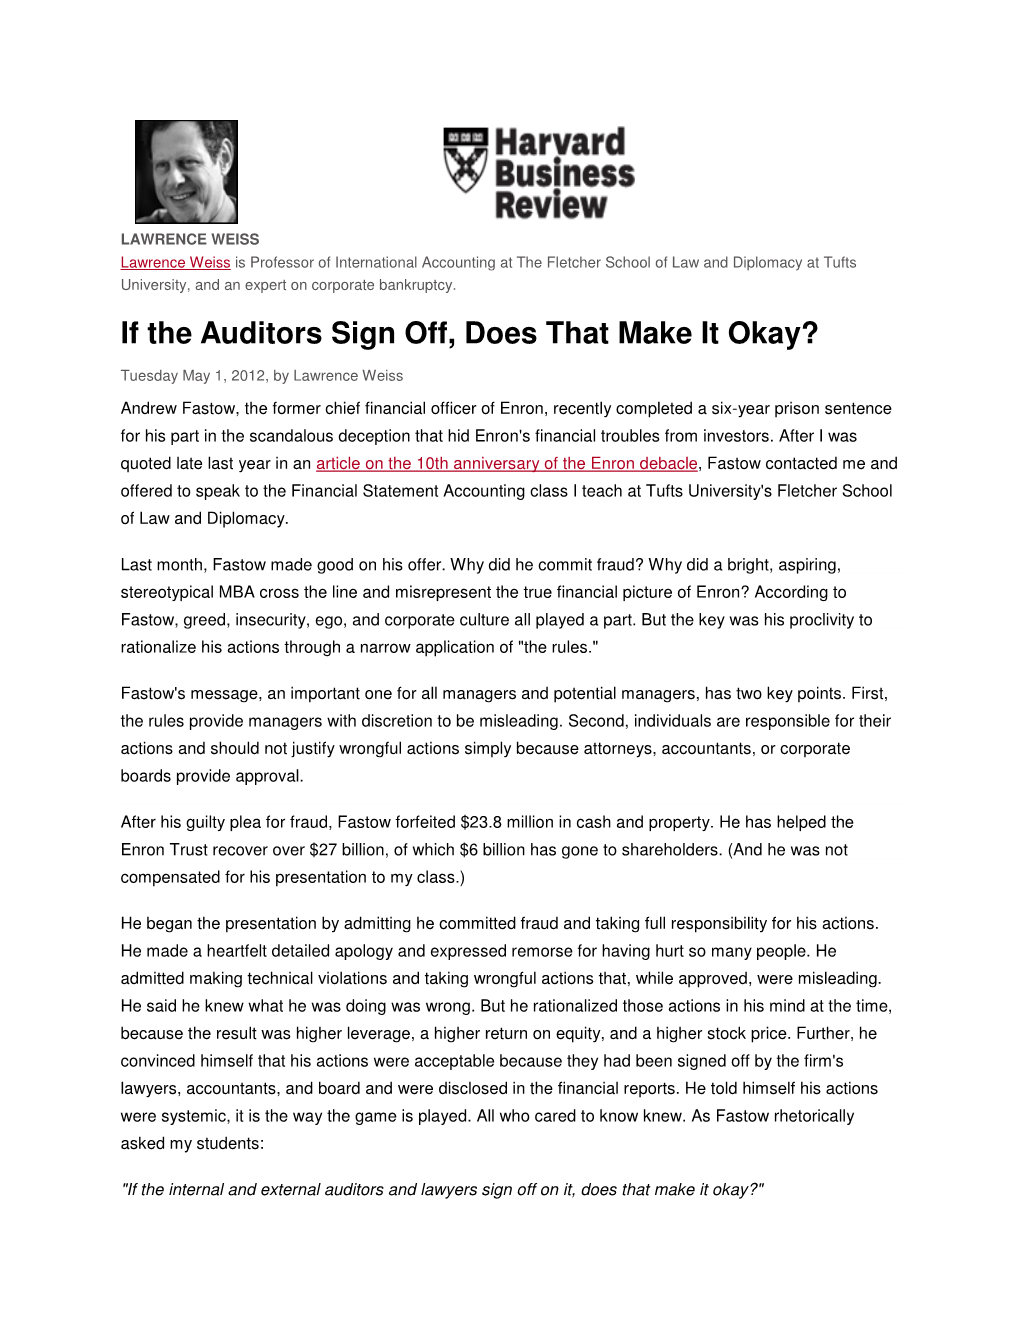 If the Auditors Sign Off, Does That Make It Okay?